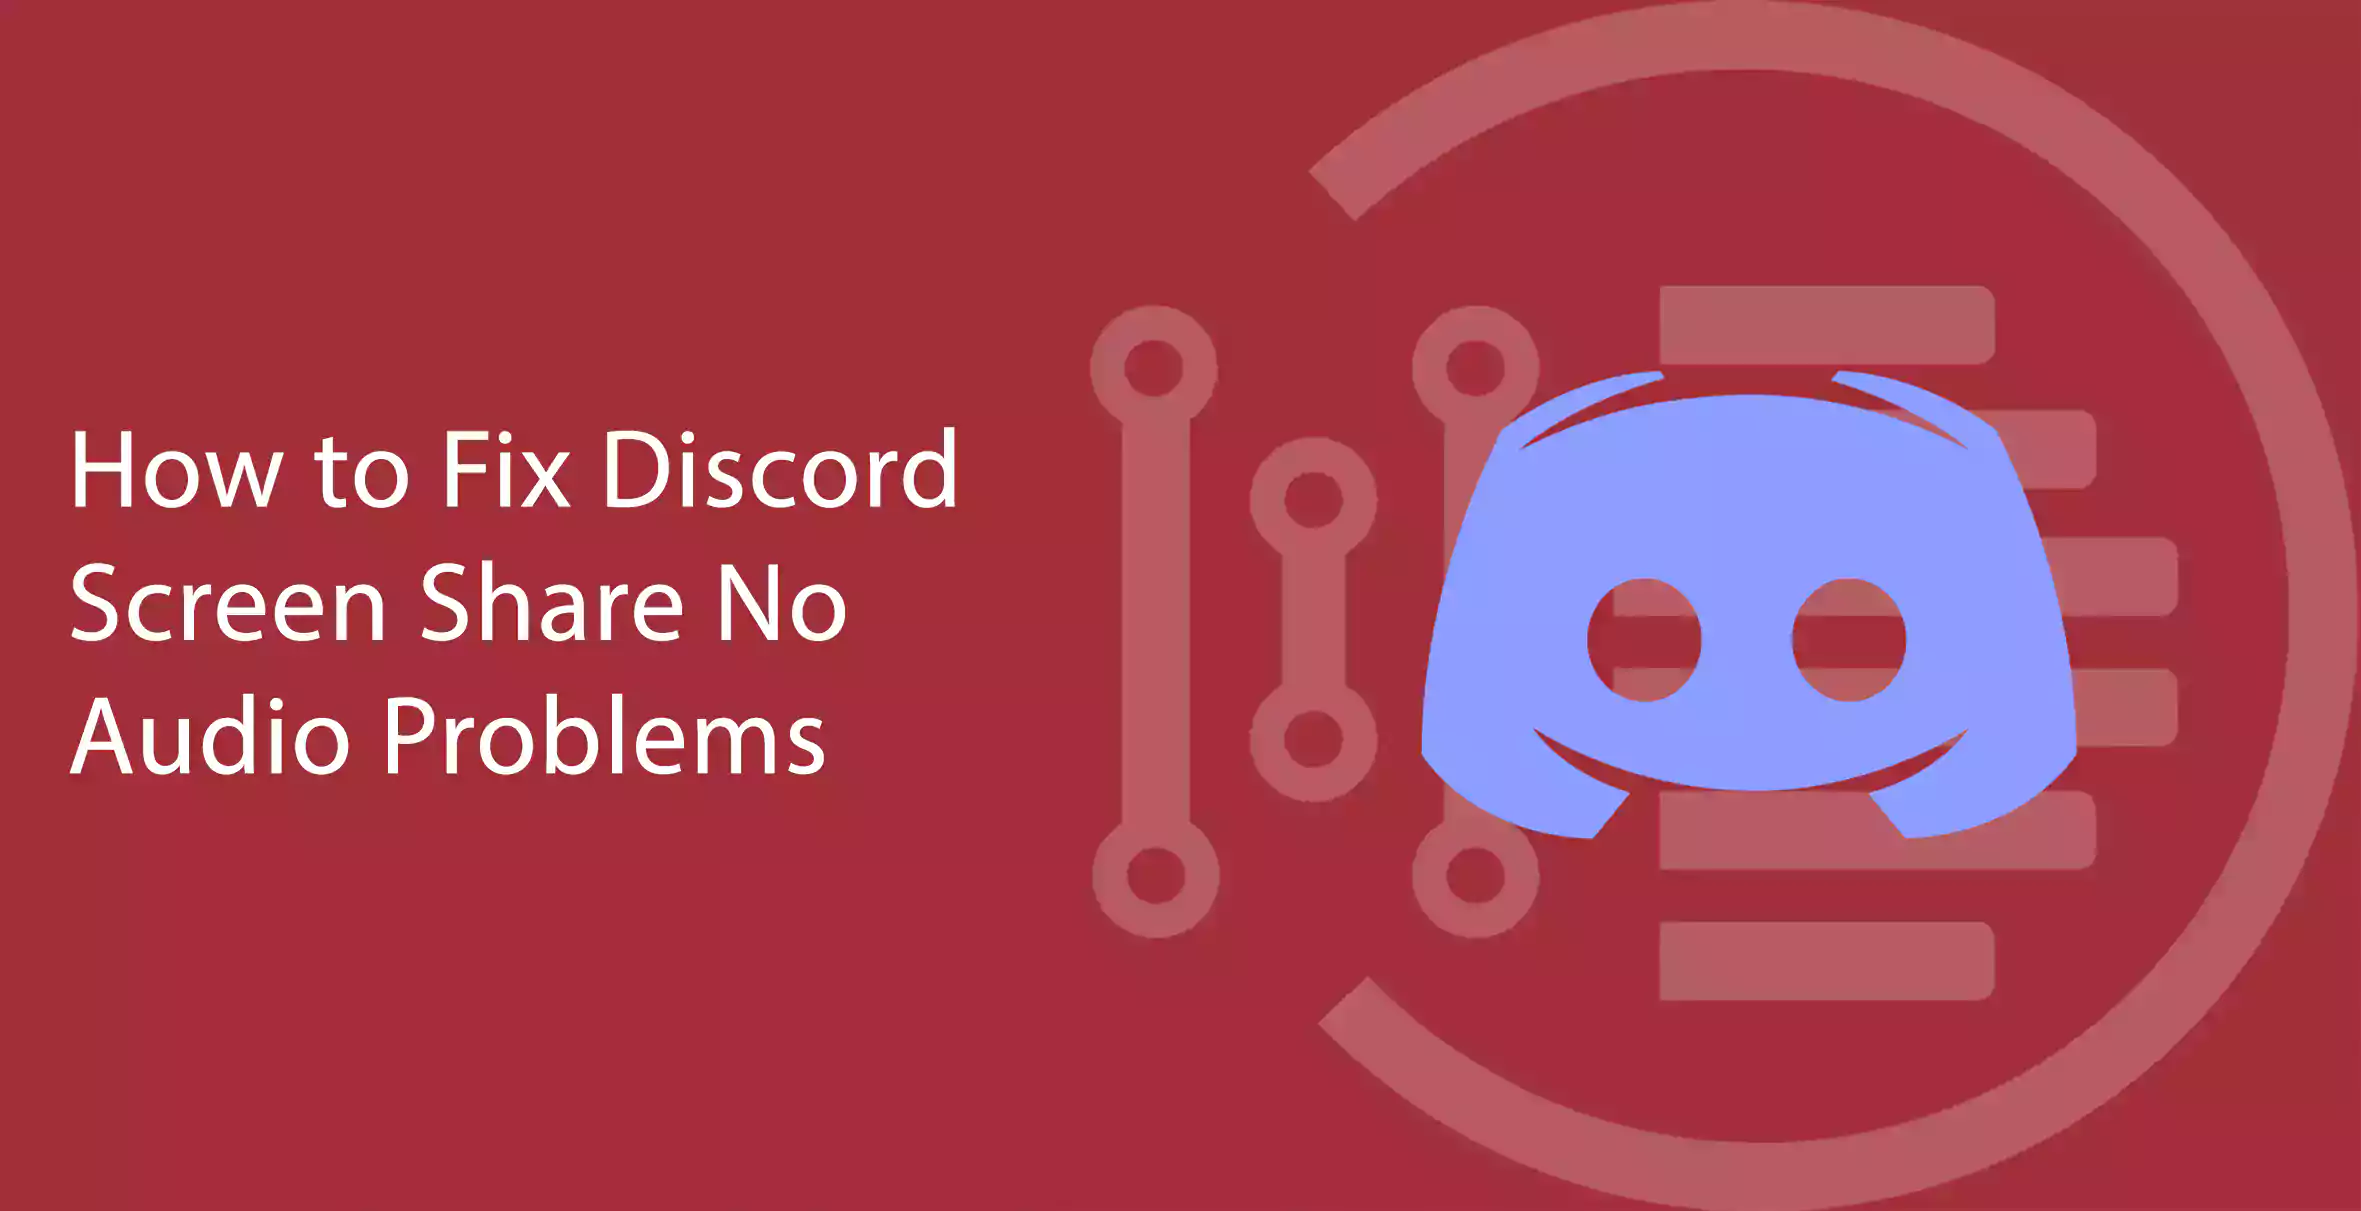 How to Fix Discord Screen Share No Audio Problems